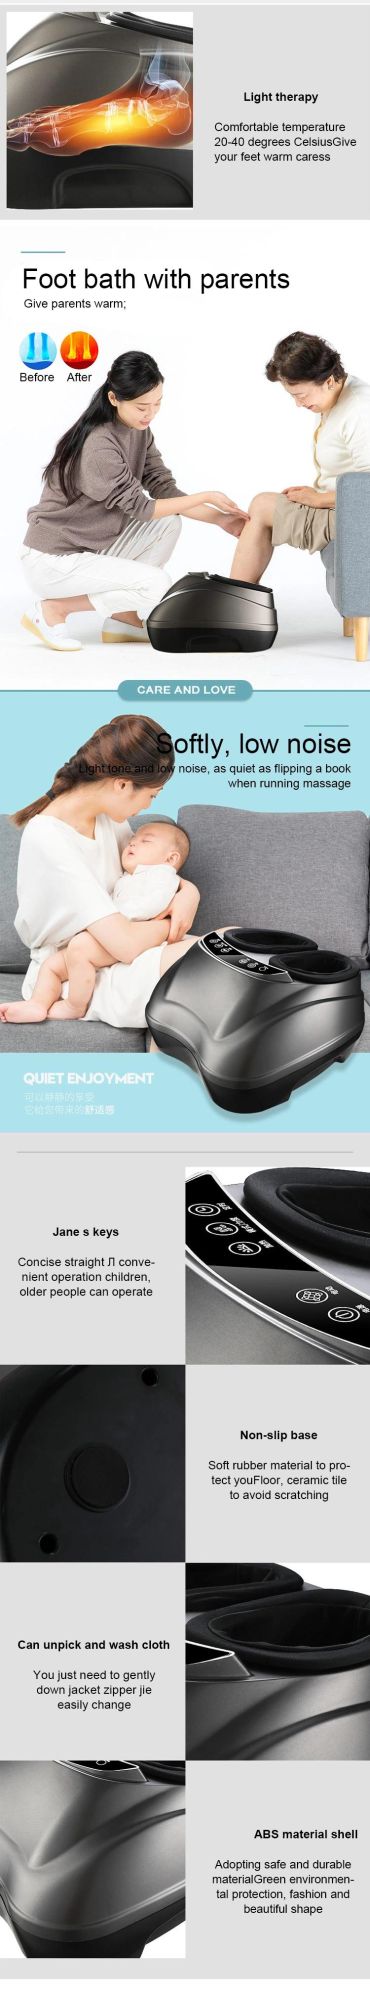 Best Selling Airpressure Foot Massage with Heating and Shin Massage